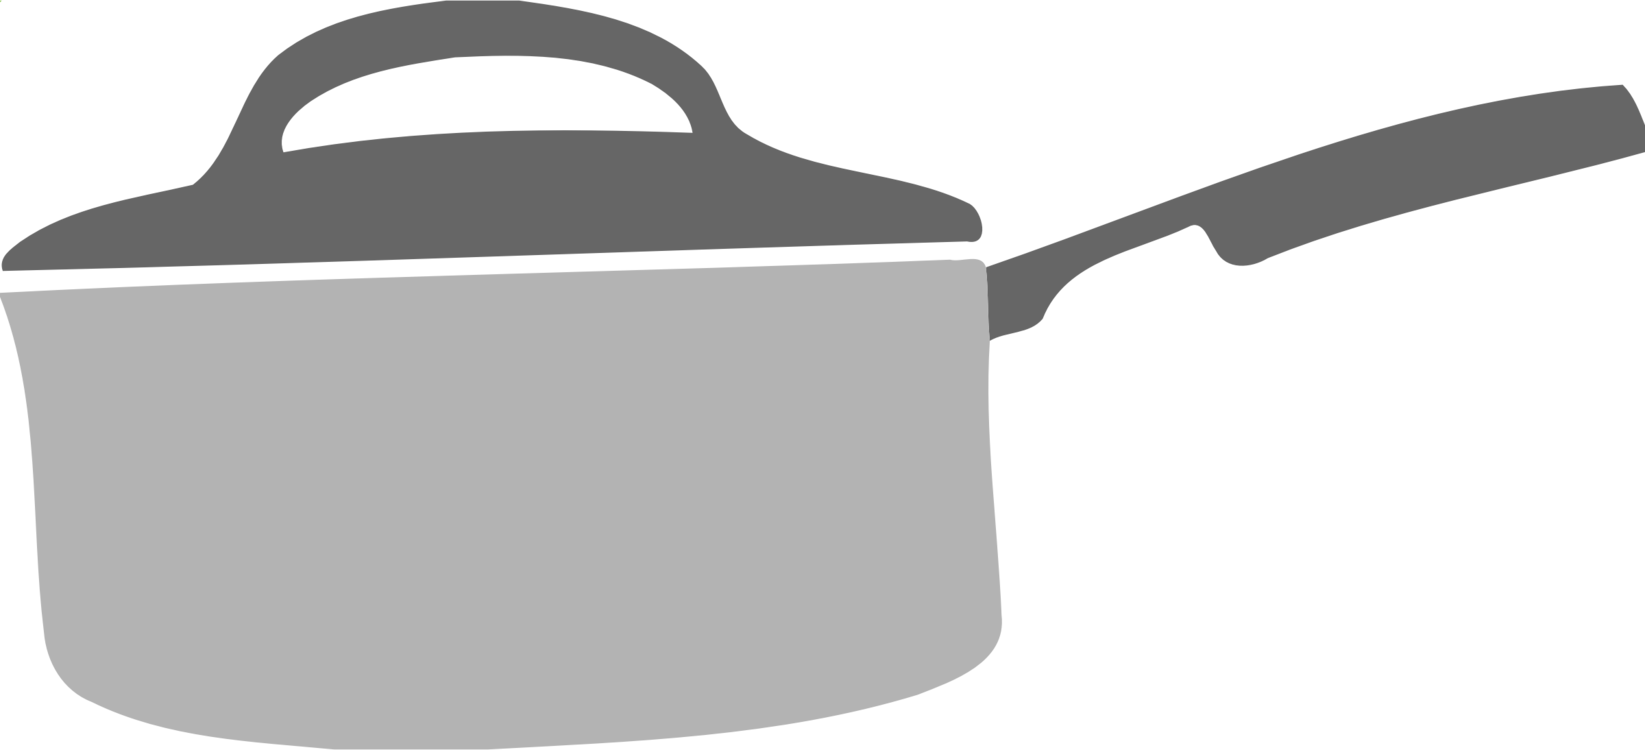 Brand,Kettle,Cookware And Bakeware